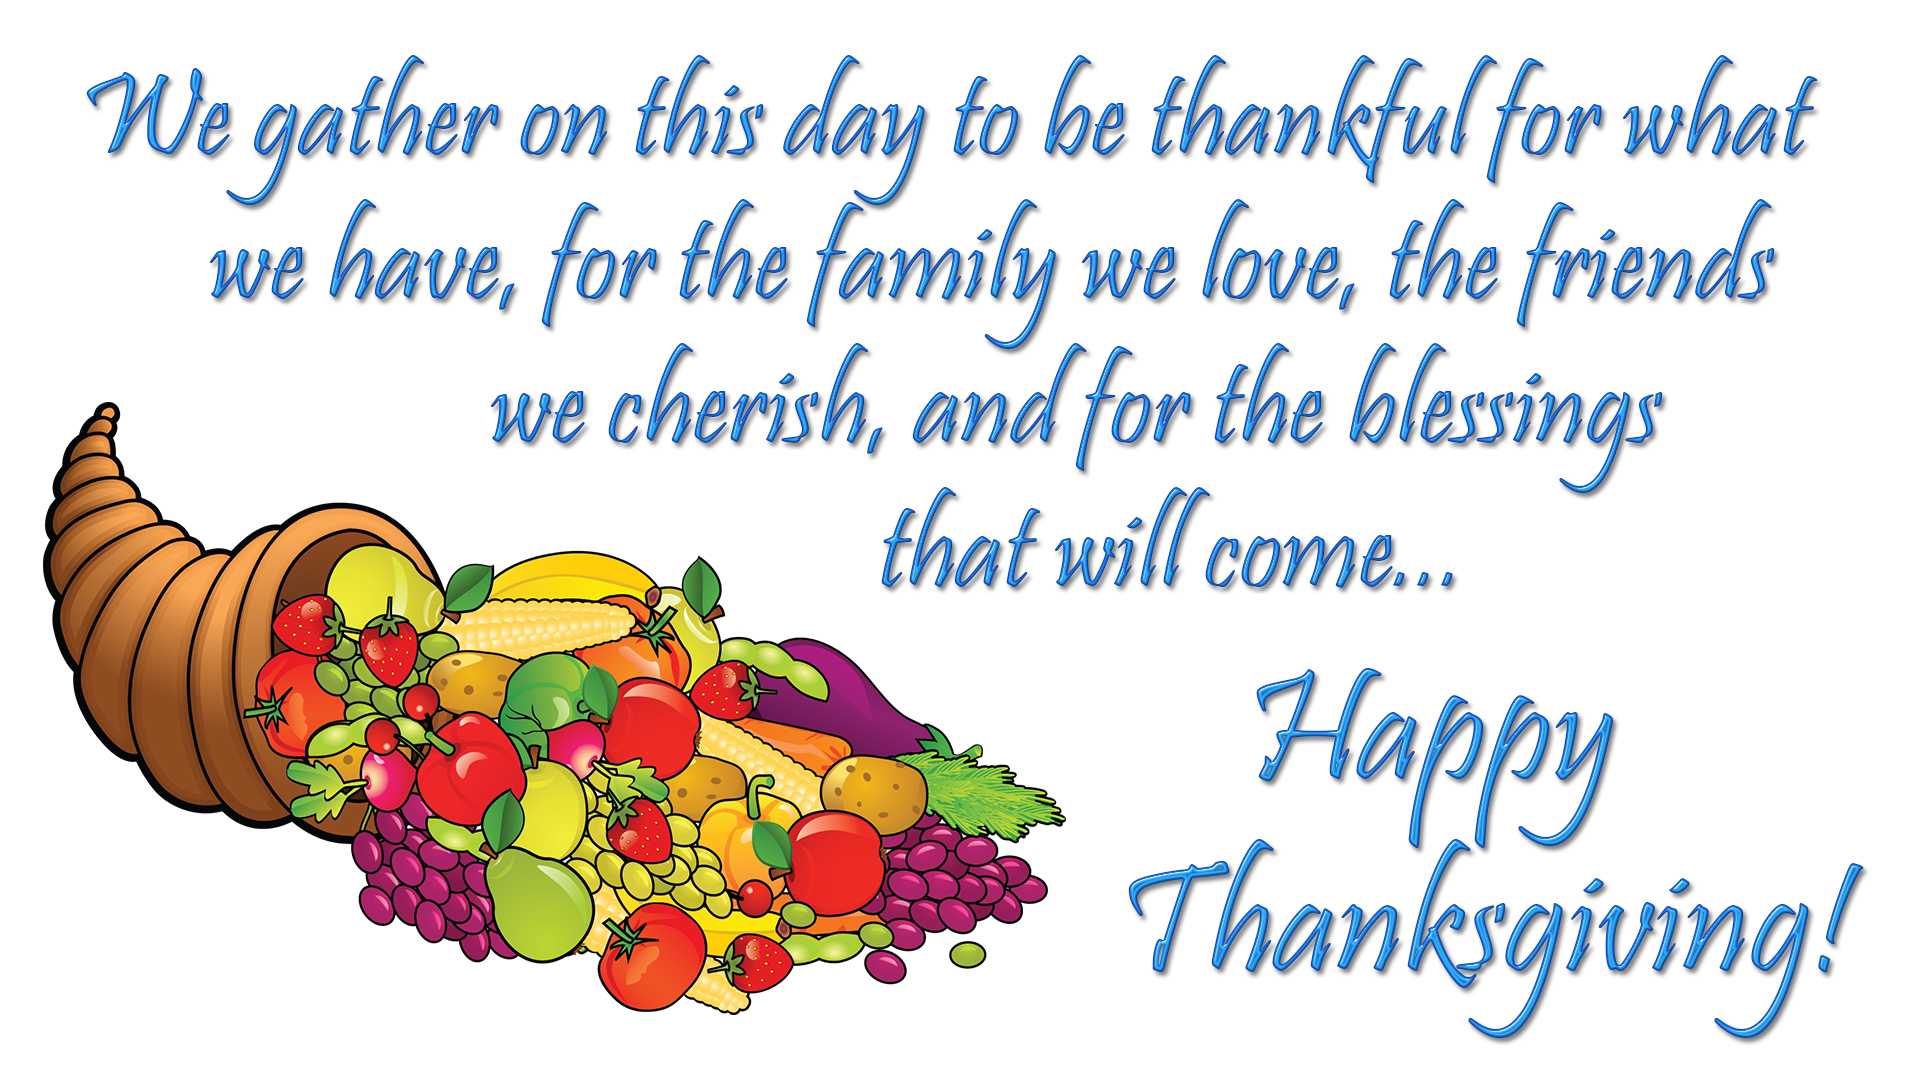 happy thanksgiving greeting card image